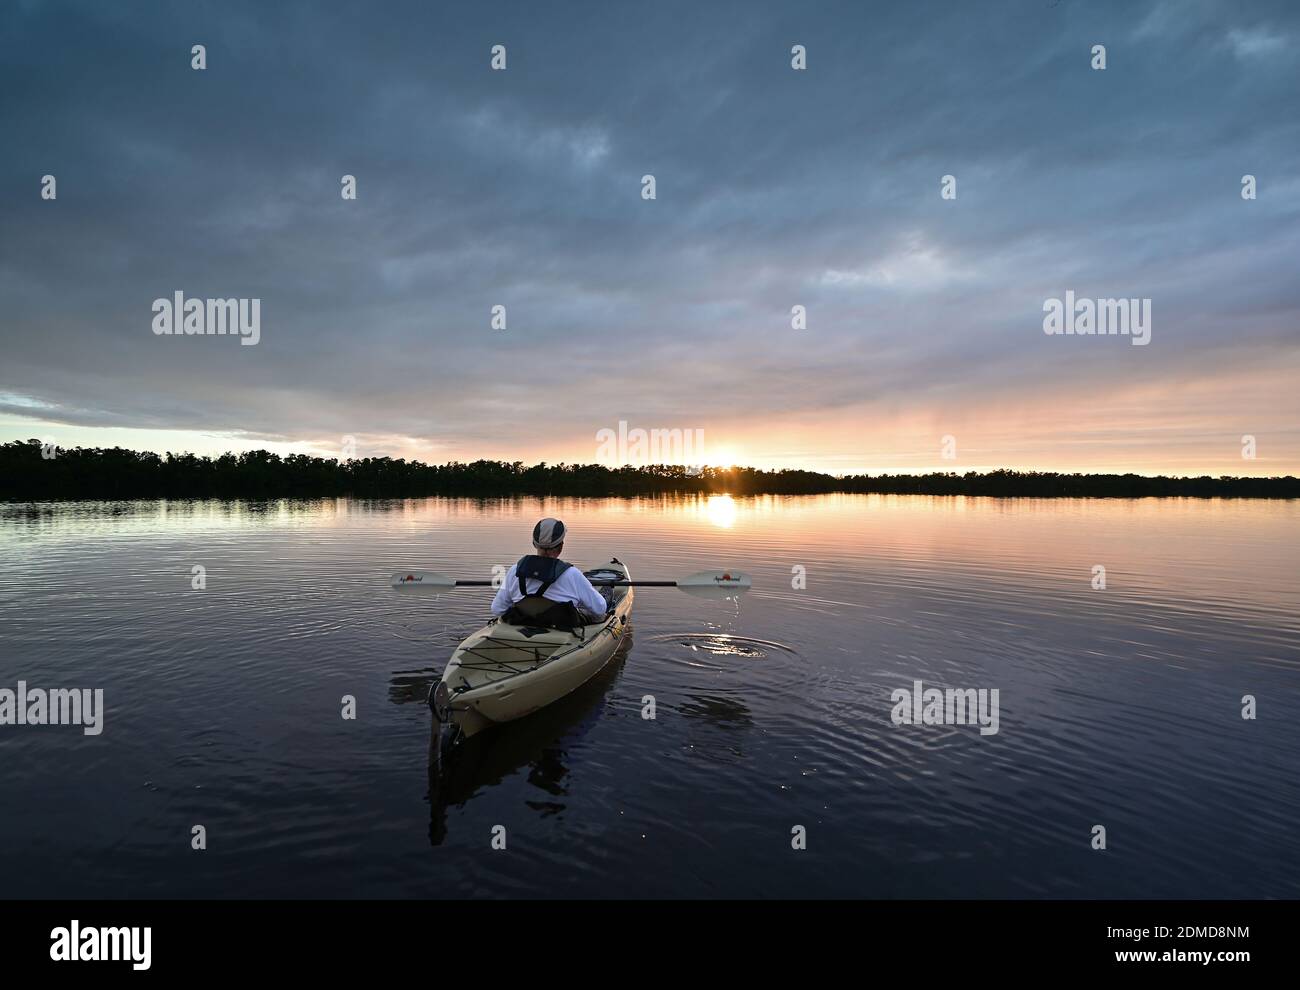 Everglades National Park, Florida - December 12, 2020 - Active senior kayaks at sunset under dramatic winter cloudscape in Coot Bay. Stock Photo